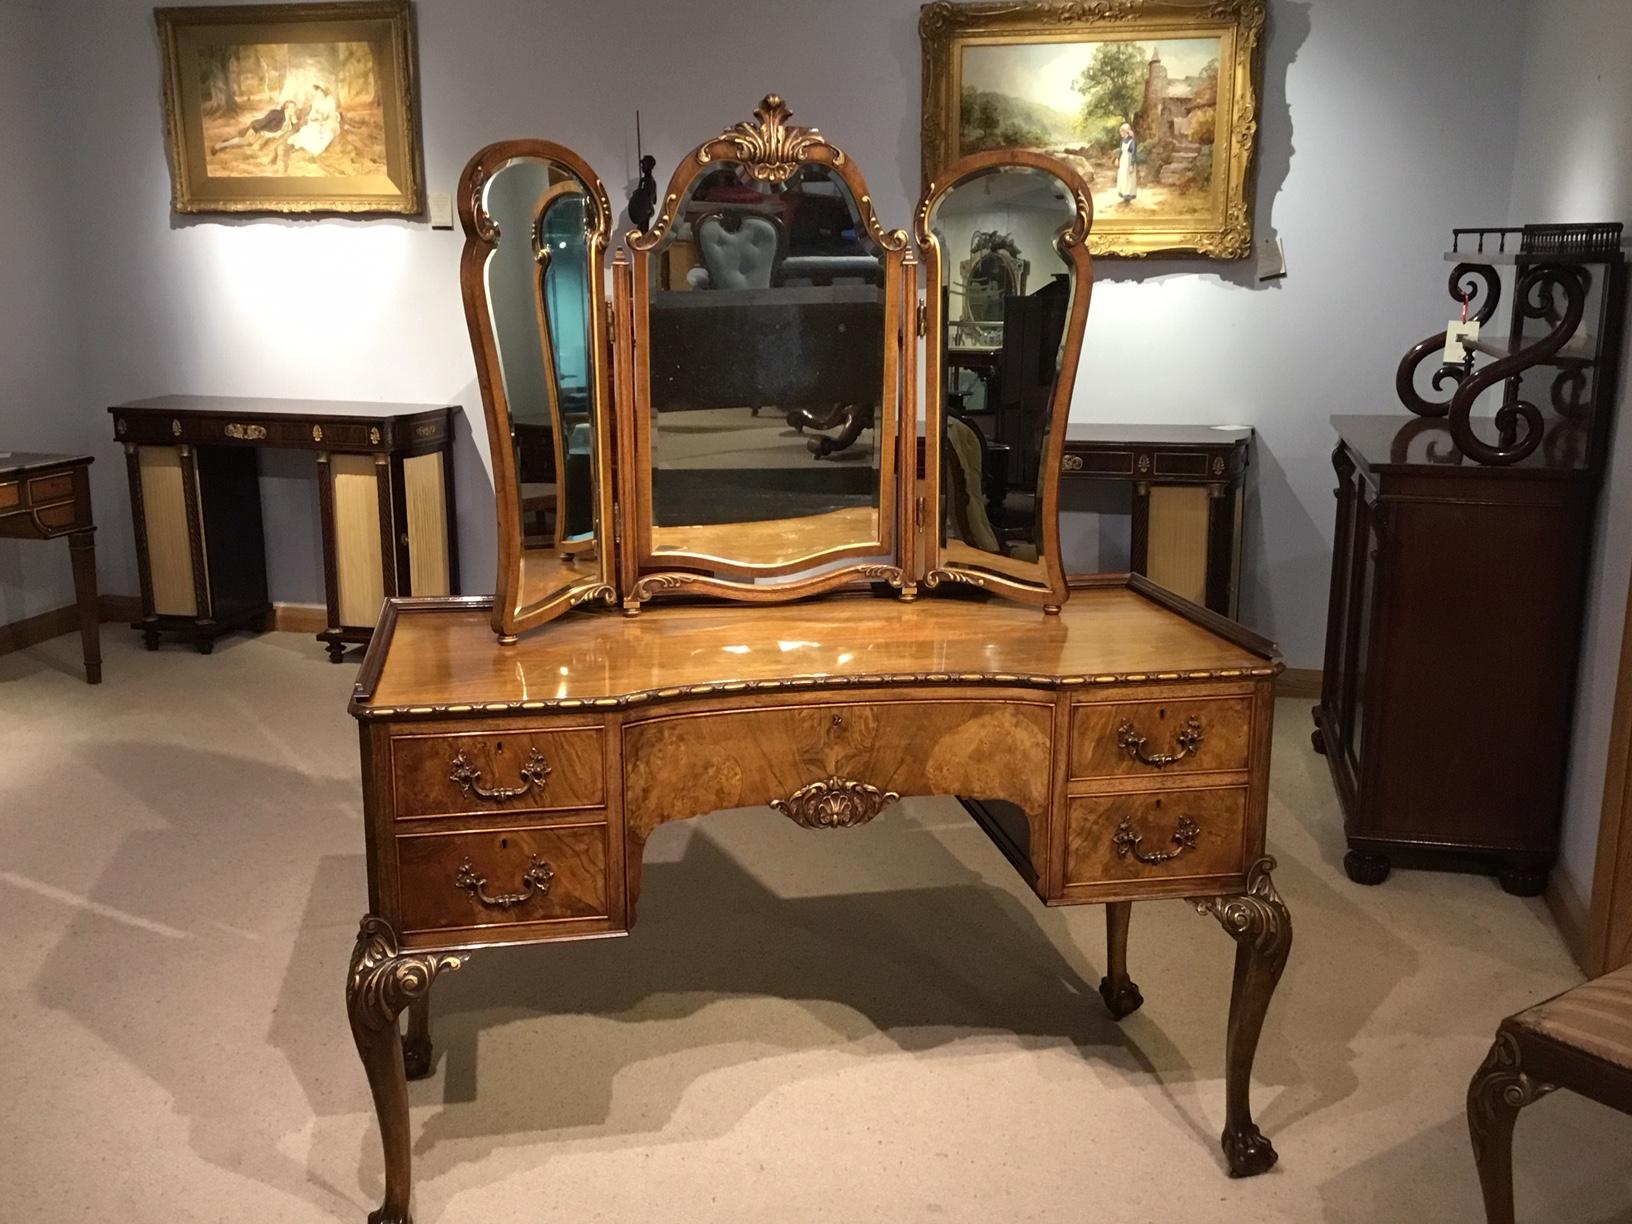 A fine quality walnut and parcel gilt Edwardian period antique dressing table and stool. The removable triptych beveled dressing mirror with fine acanthus and heightened gilt carved detail sitting on a concave shaped base with egg and dart molding.